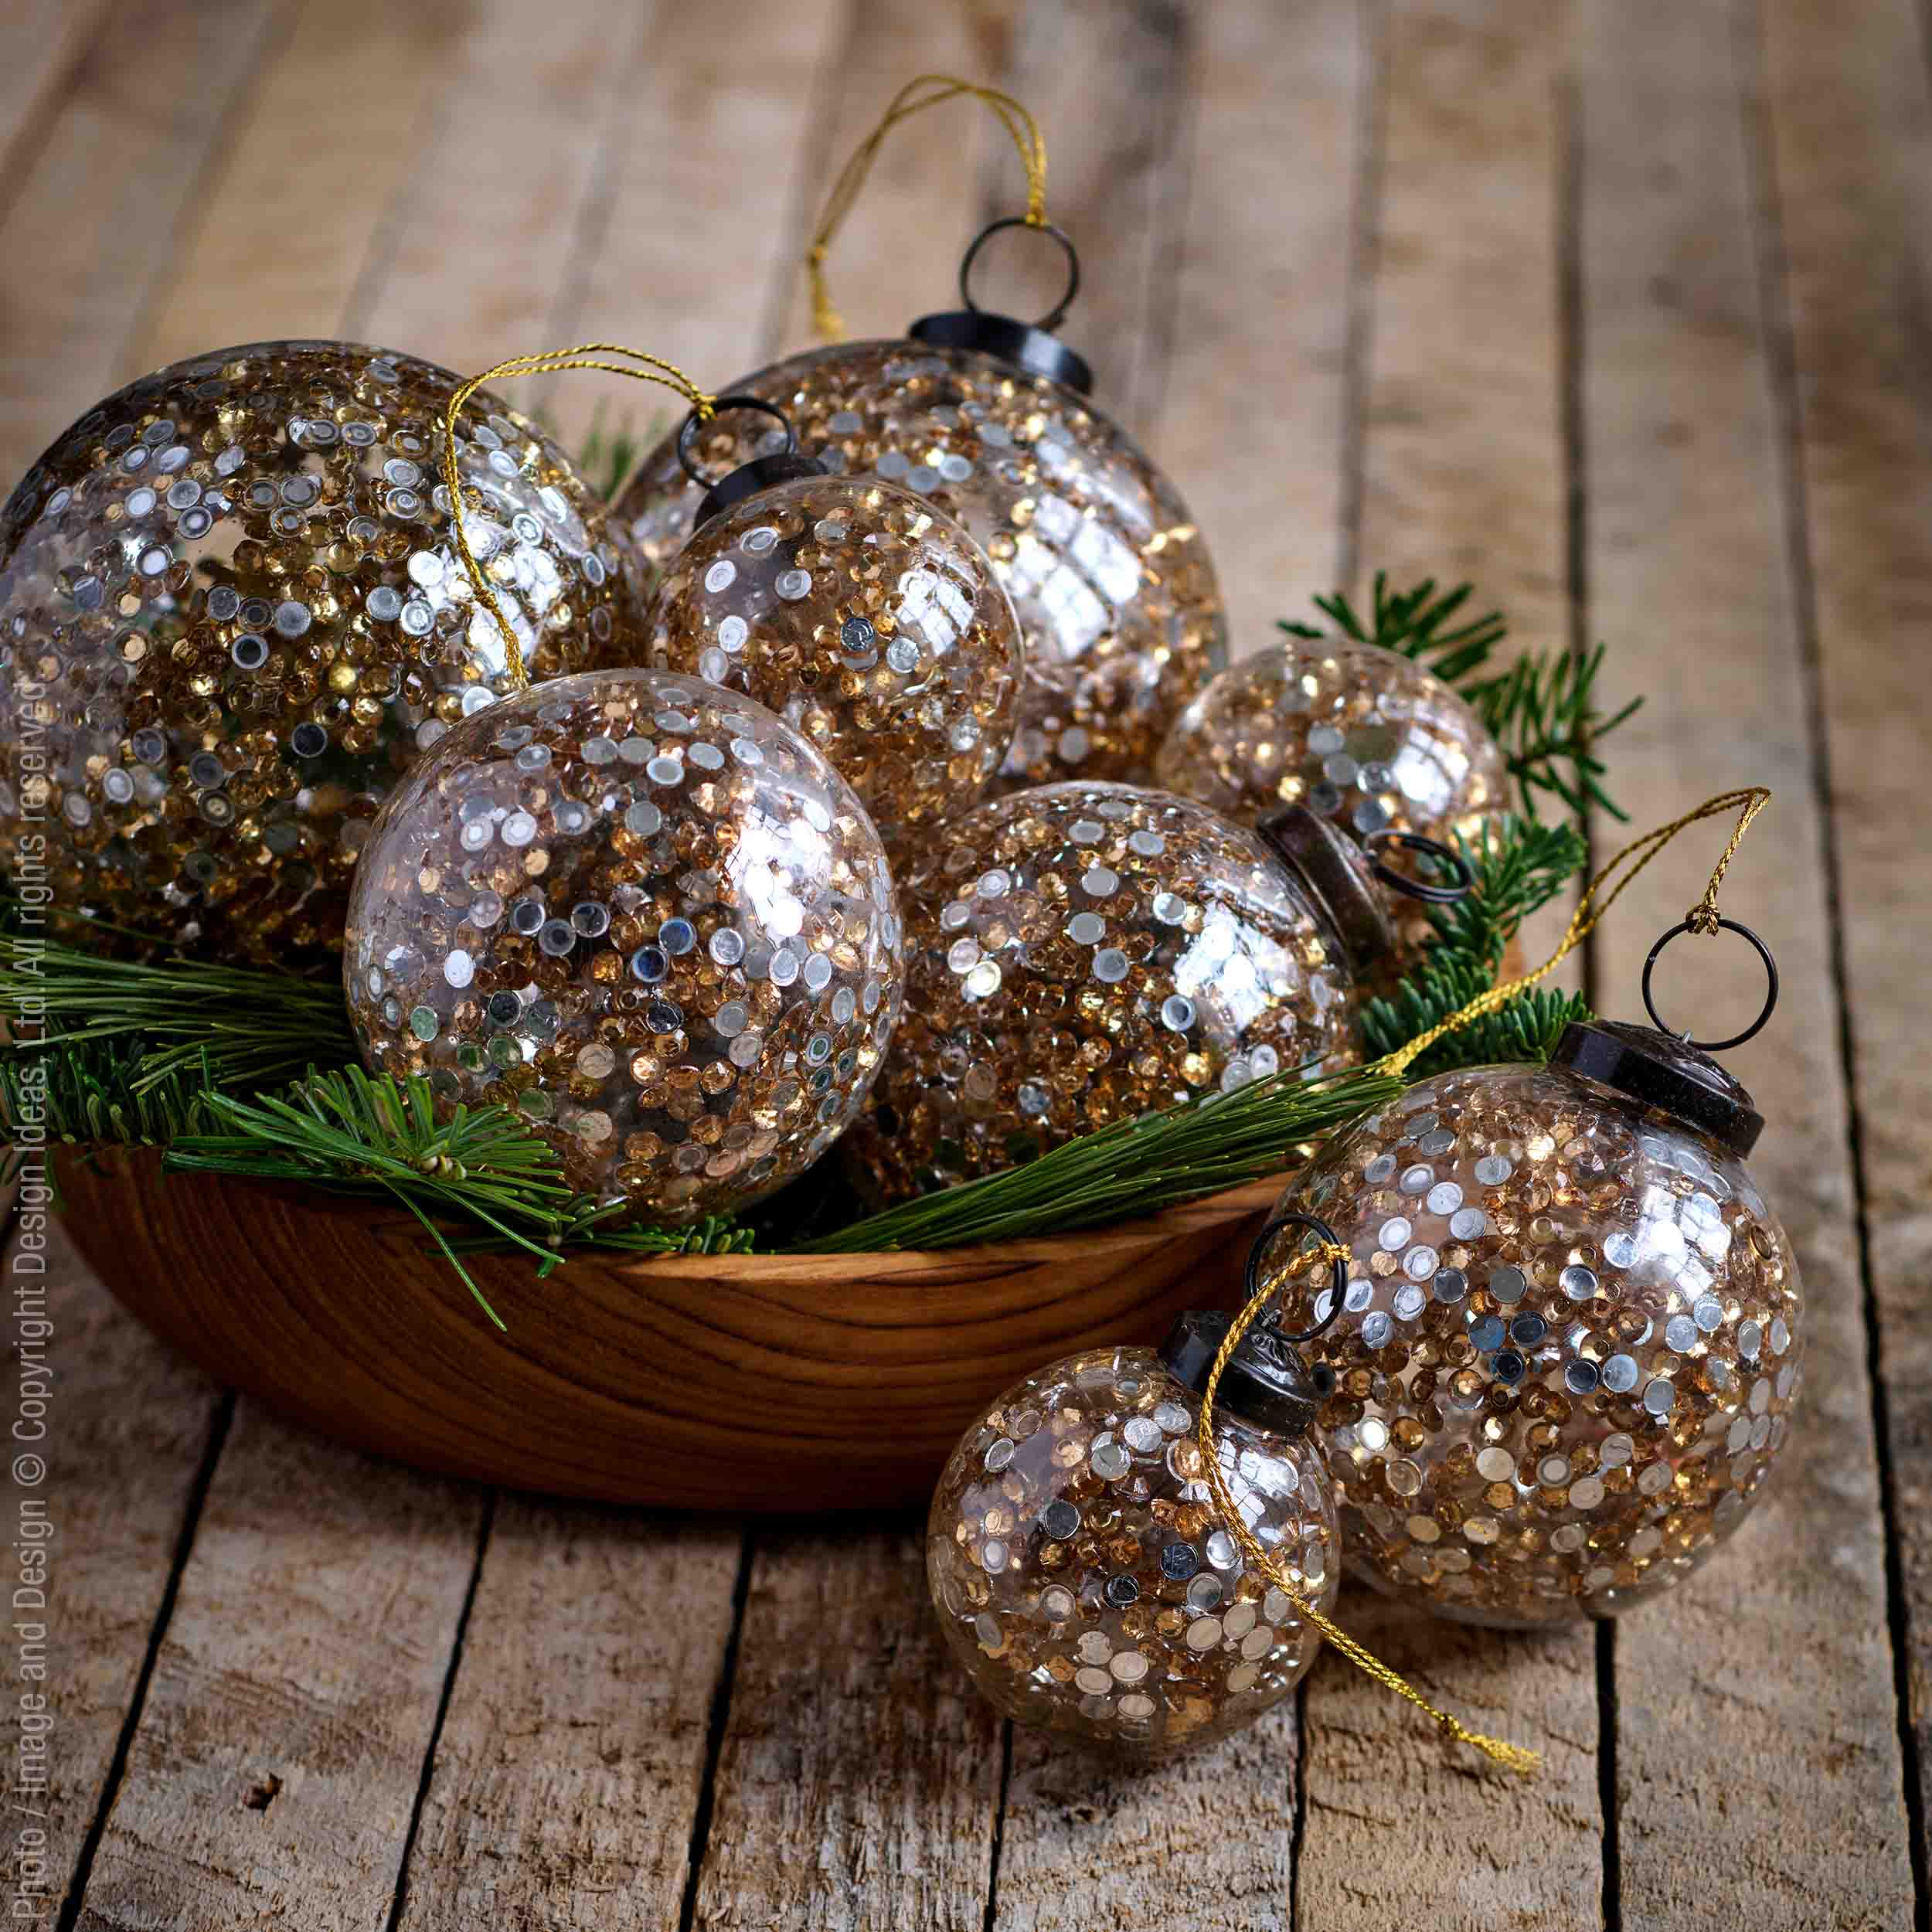 Zazzle™ ornament, 4in - Golden | Image 2 | Premium Ornaments from the Zazzle collection | made with Glass for long lasting use | texxture